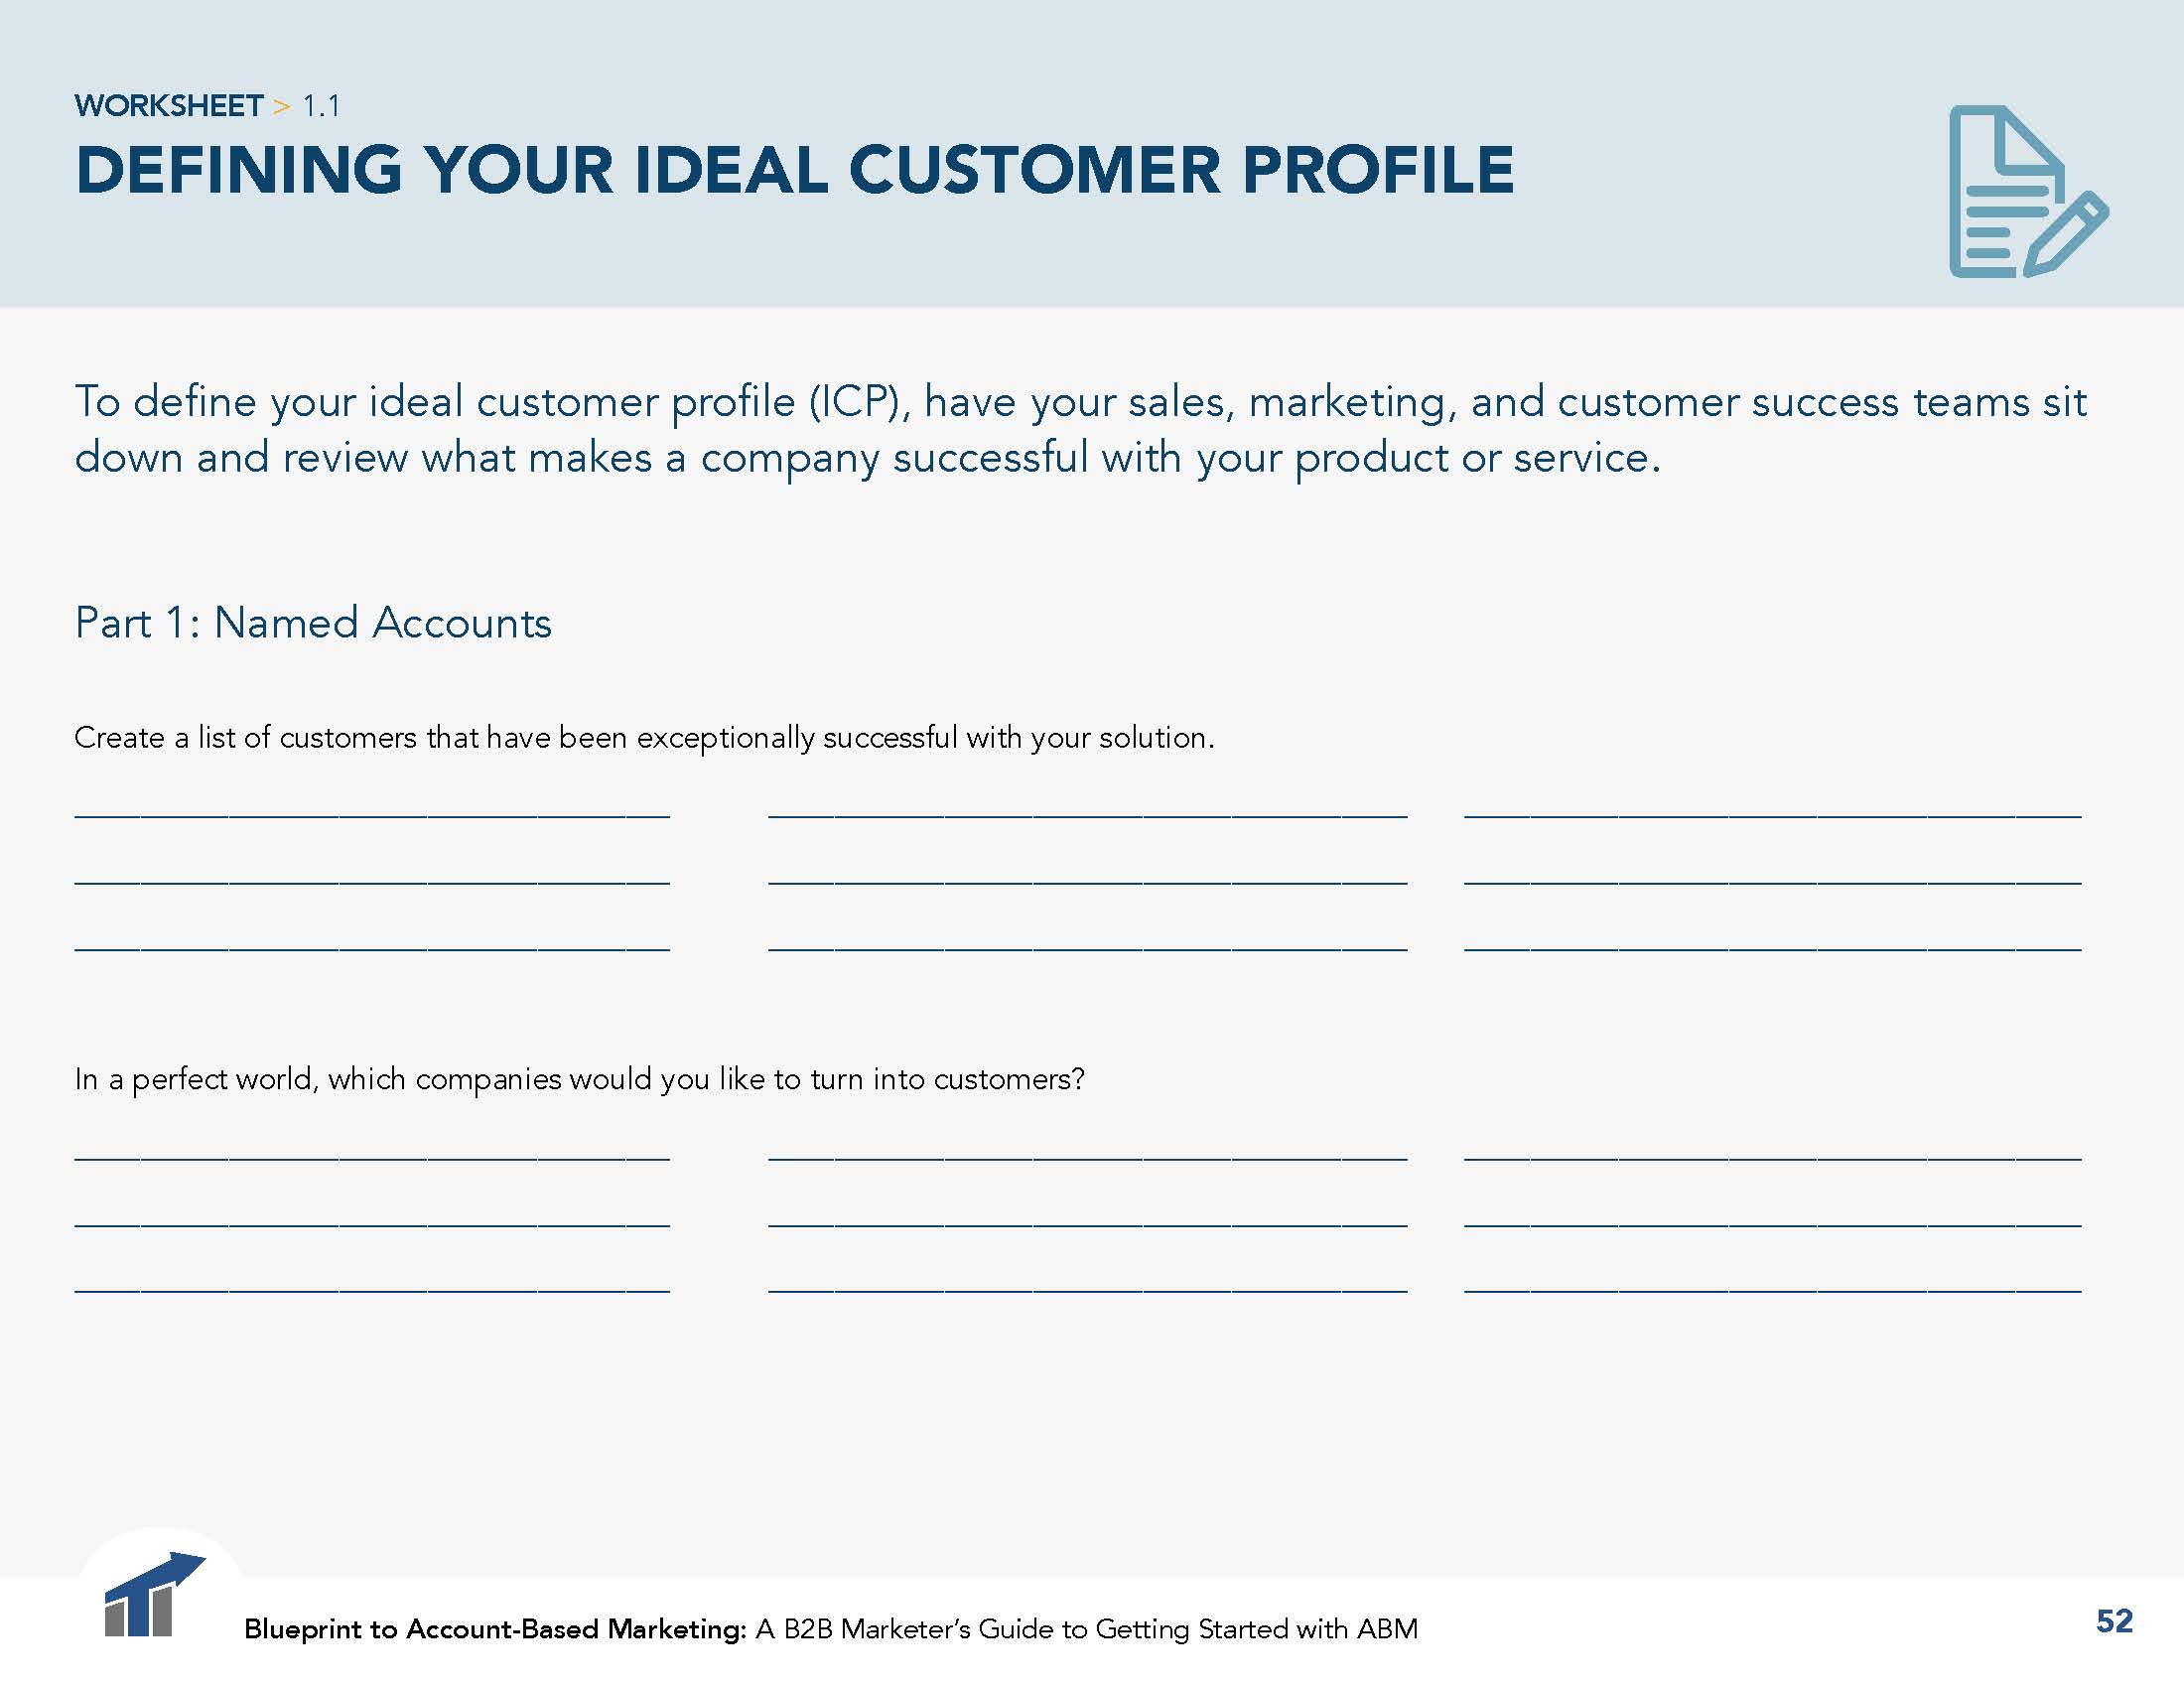 Defining your ideal customer profile for ABM